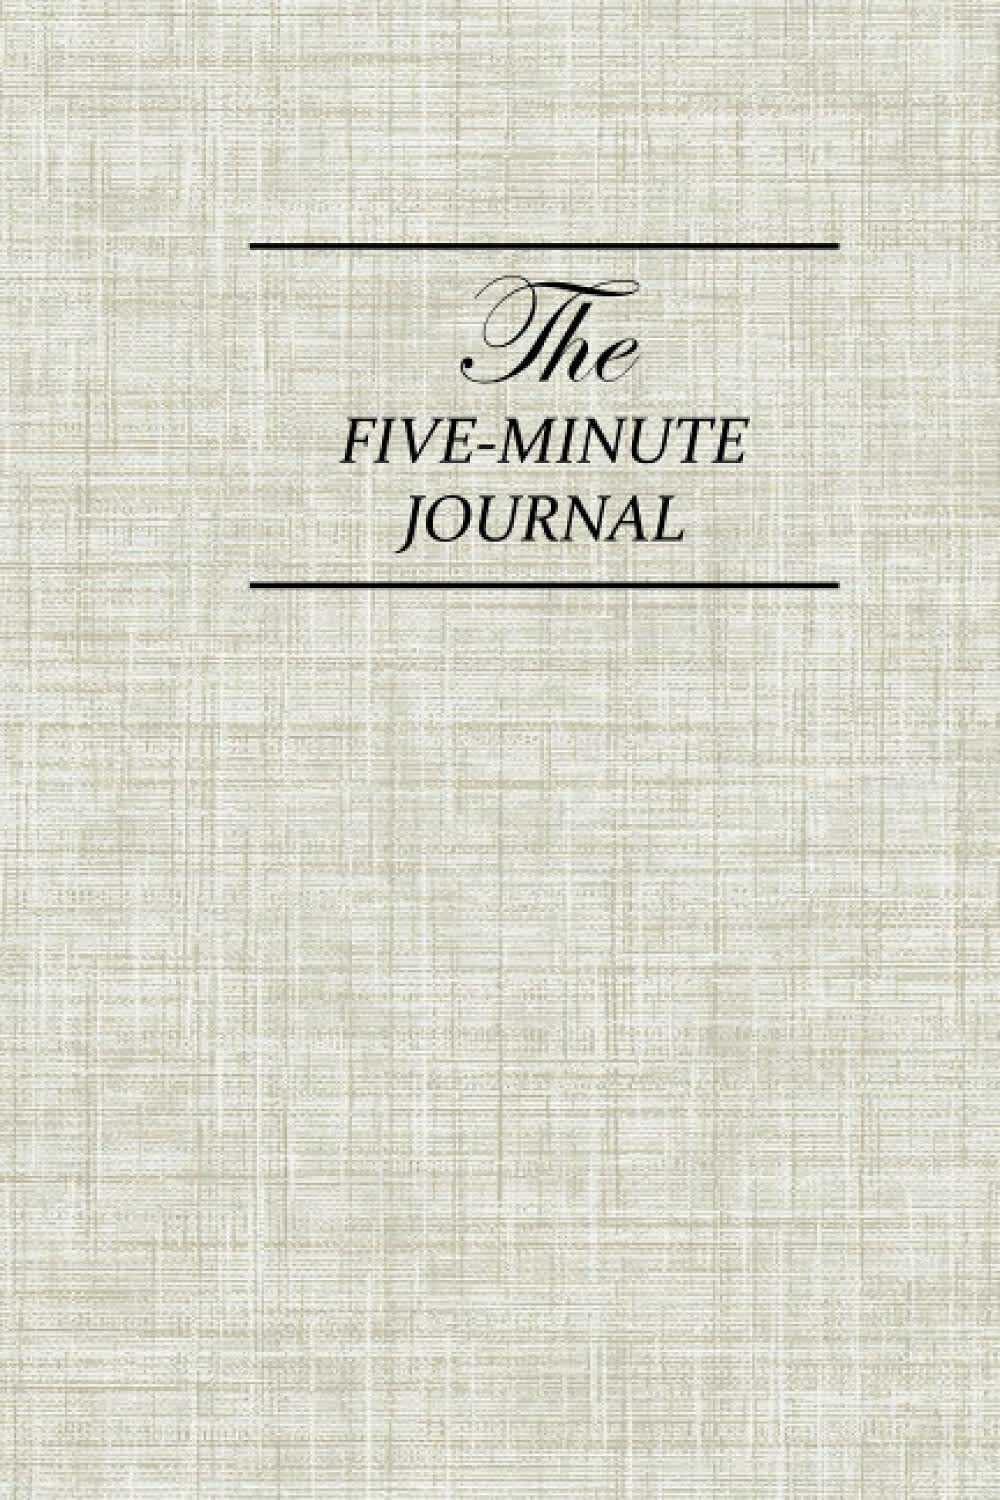 The Five Minute Journal: Our Review – Ryokō